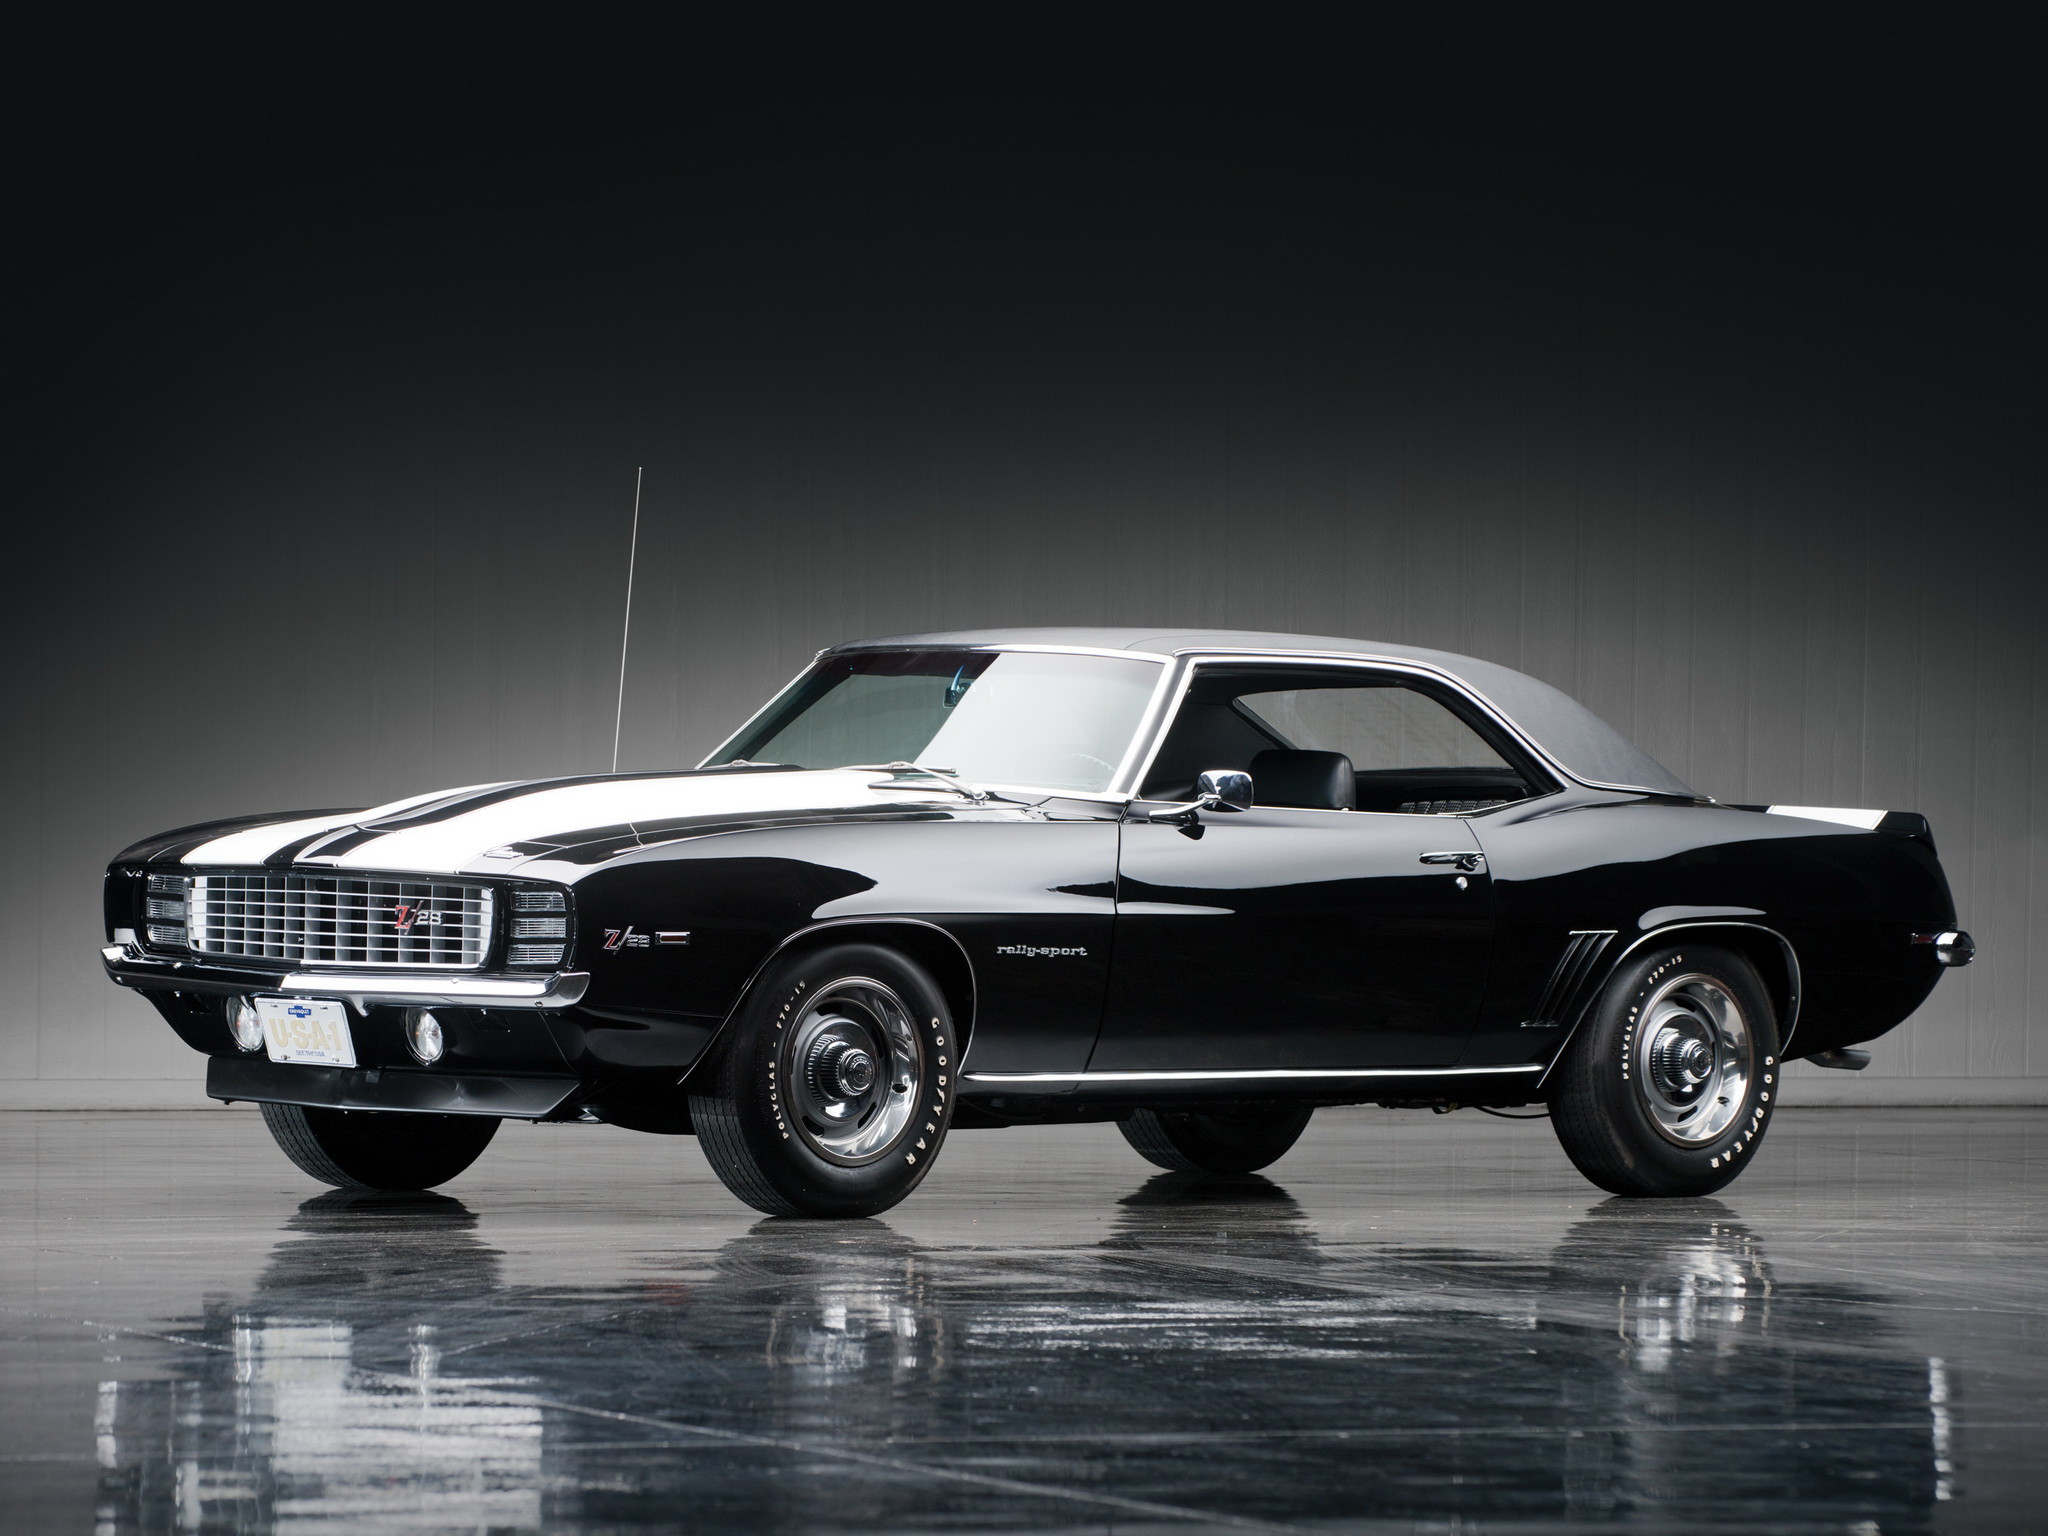 2048x1536 Chevrolet Camaro Classic Pic wallpapers (76 Wallpapers)